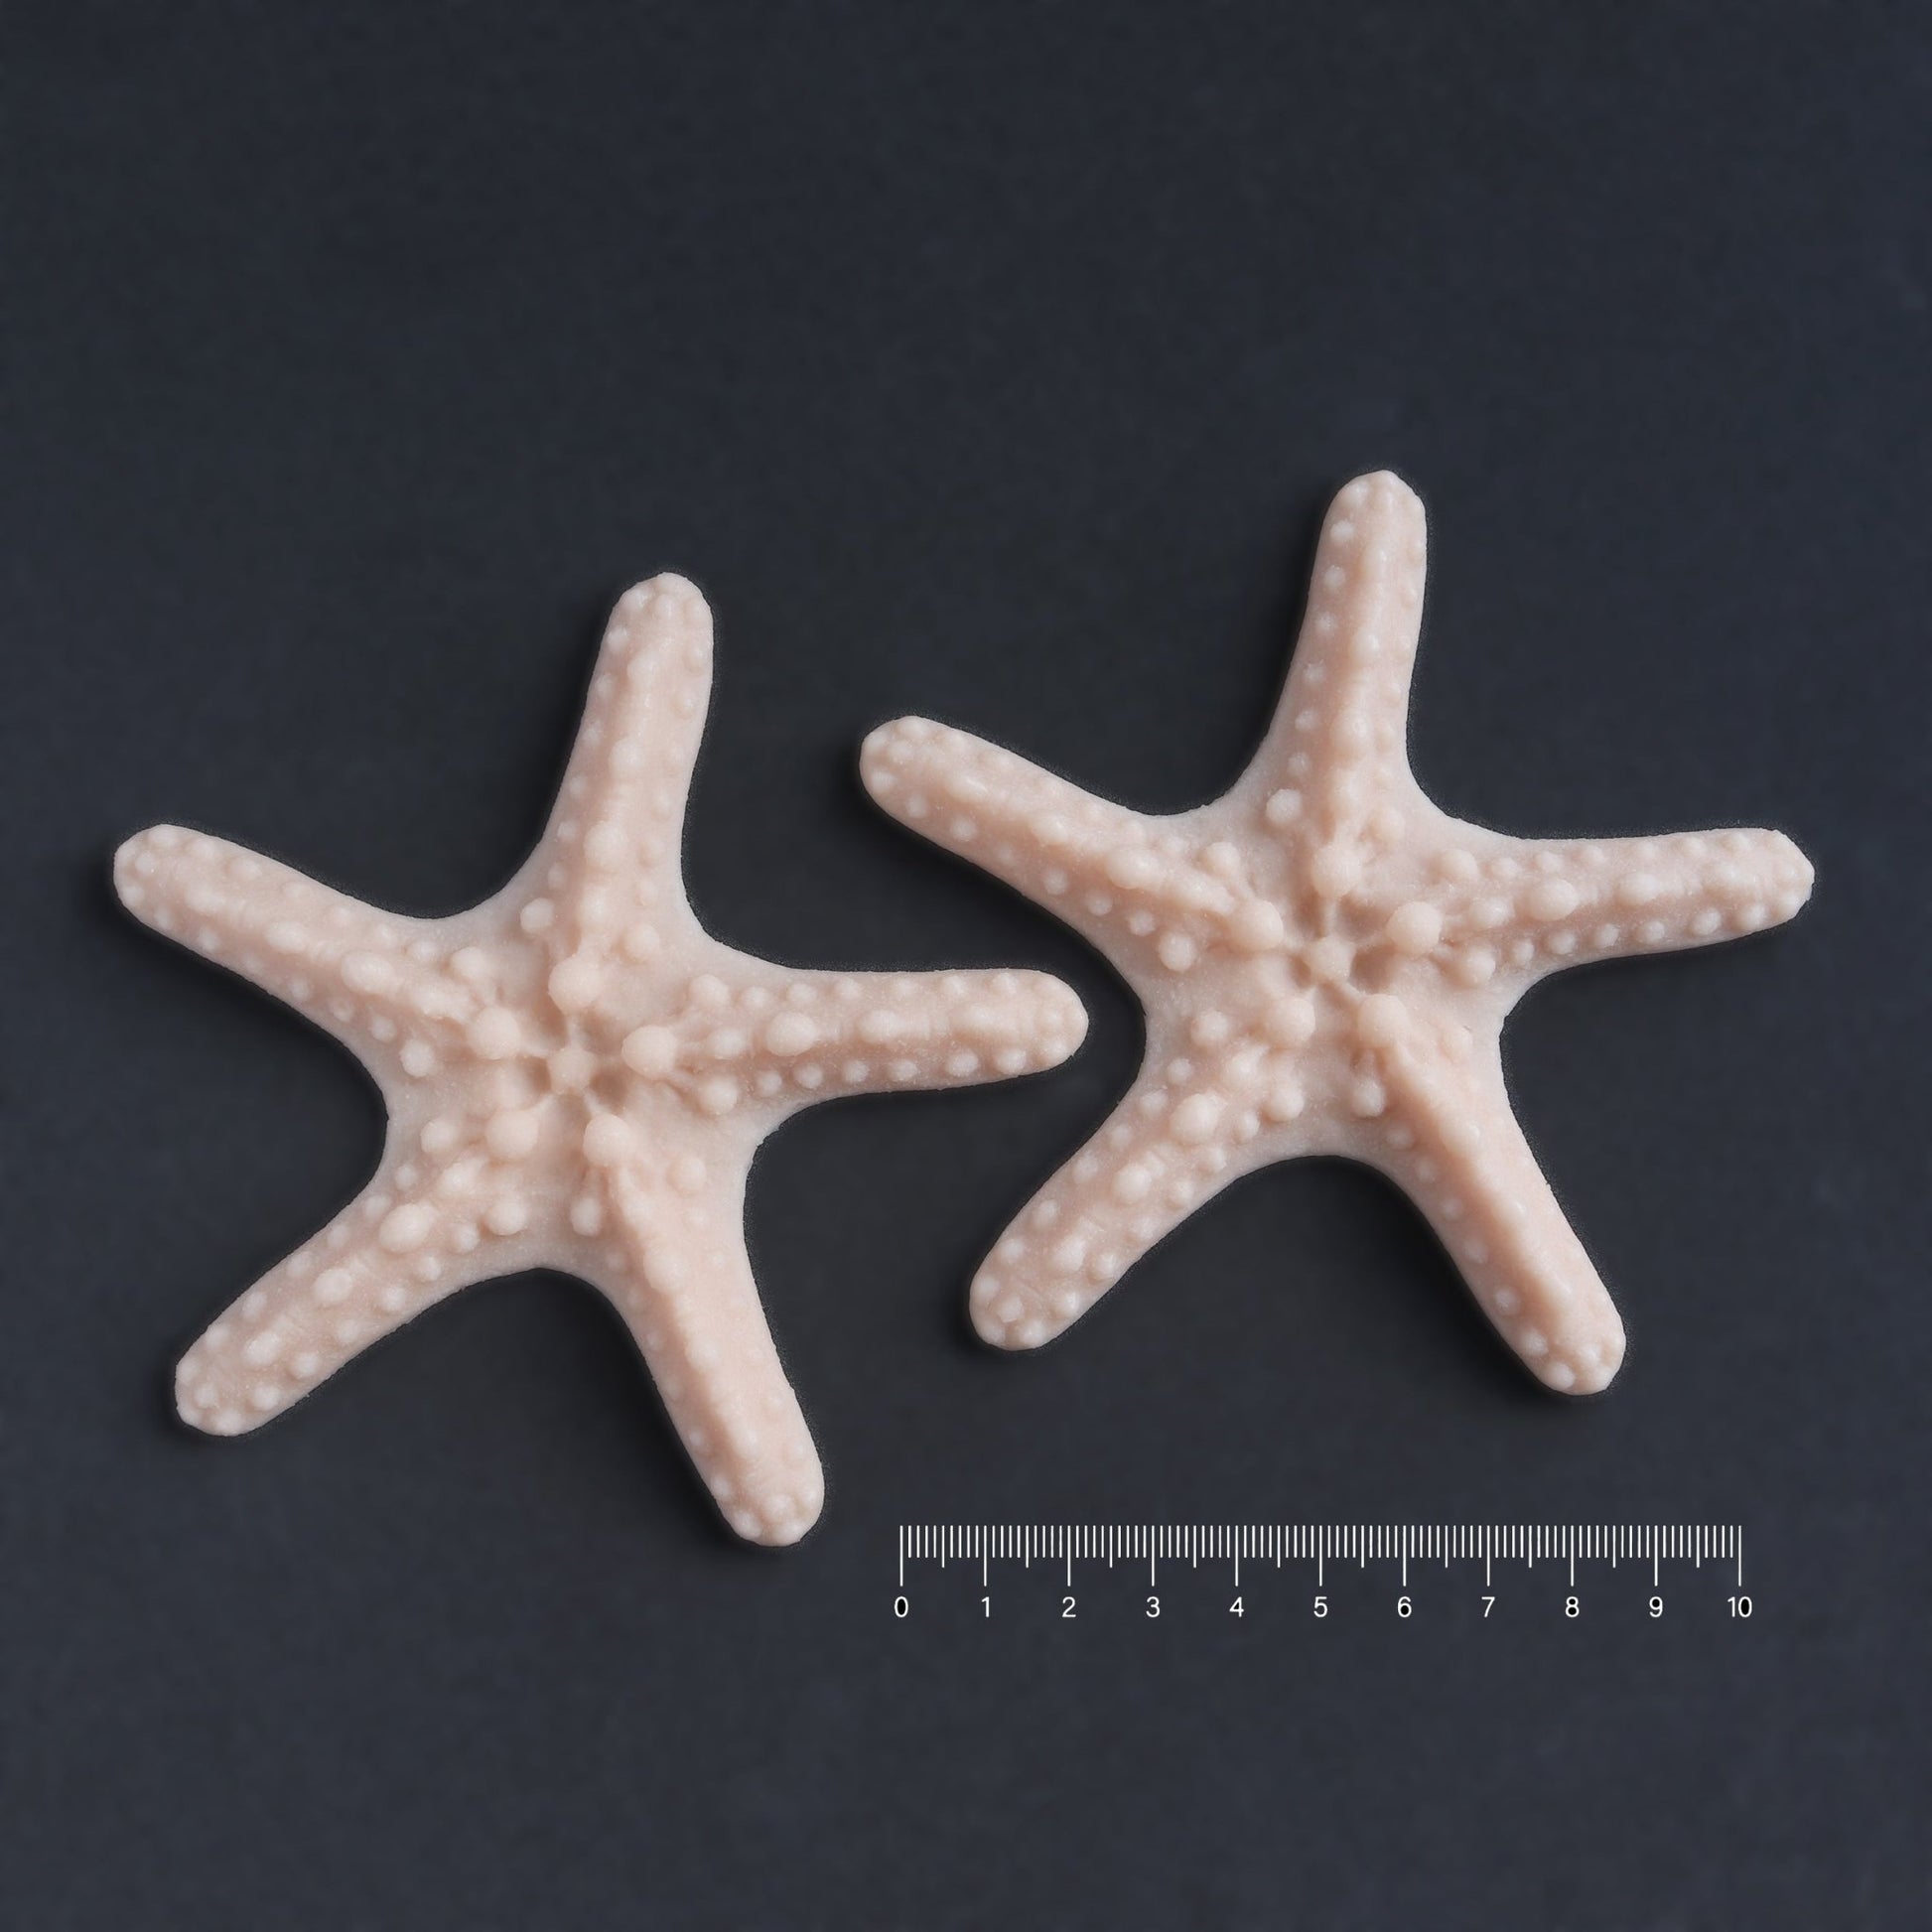 Two starfish in vanilla shade on a black surface with a ruler